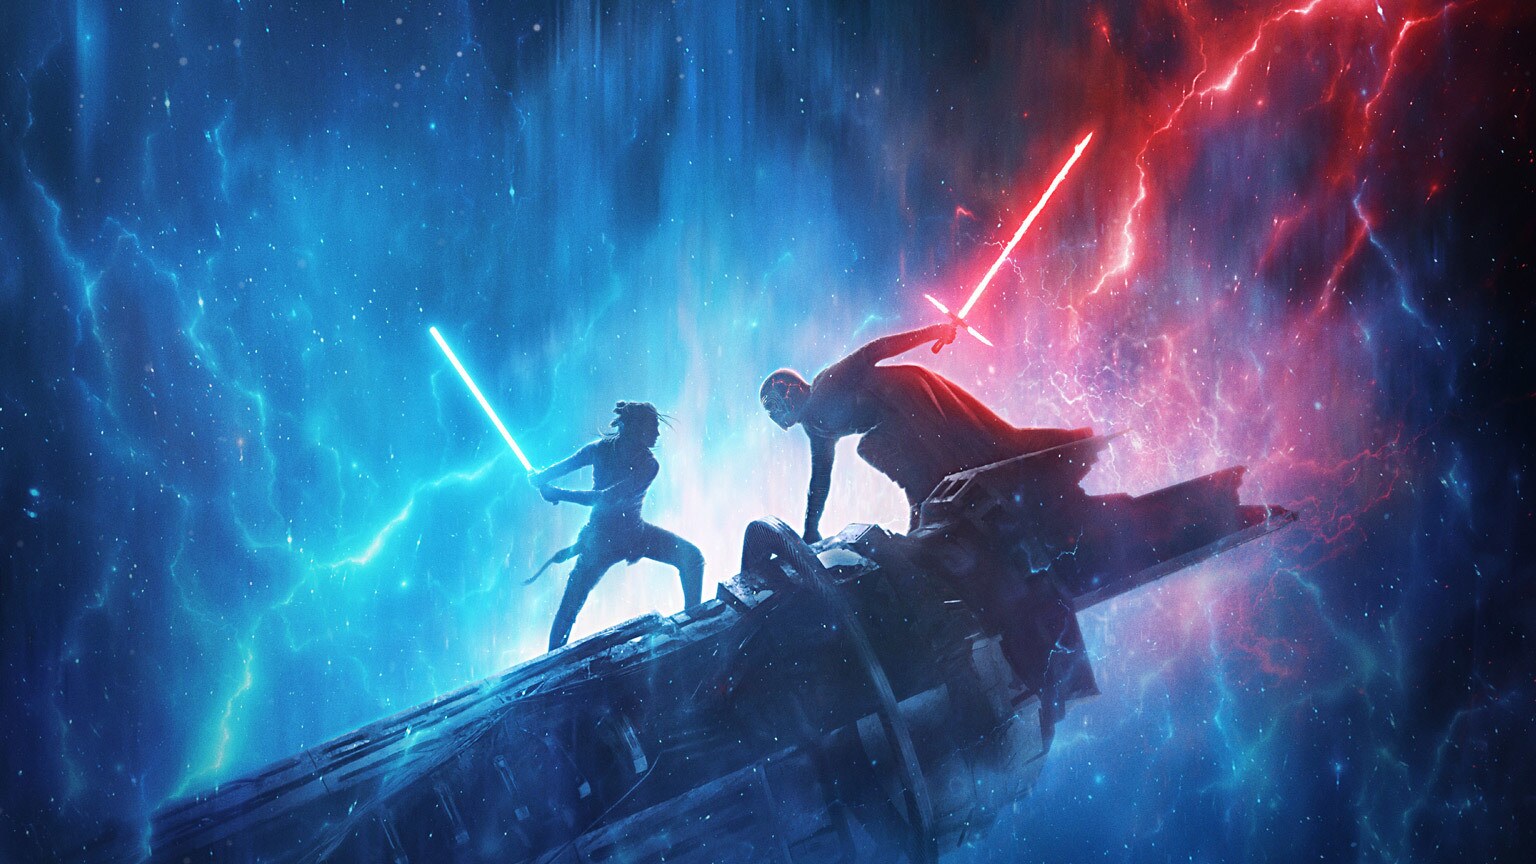 D23 Expo 2019: Star Wars: The Rise of Skywalker Poster Revealed